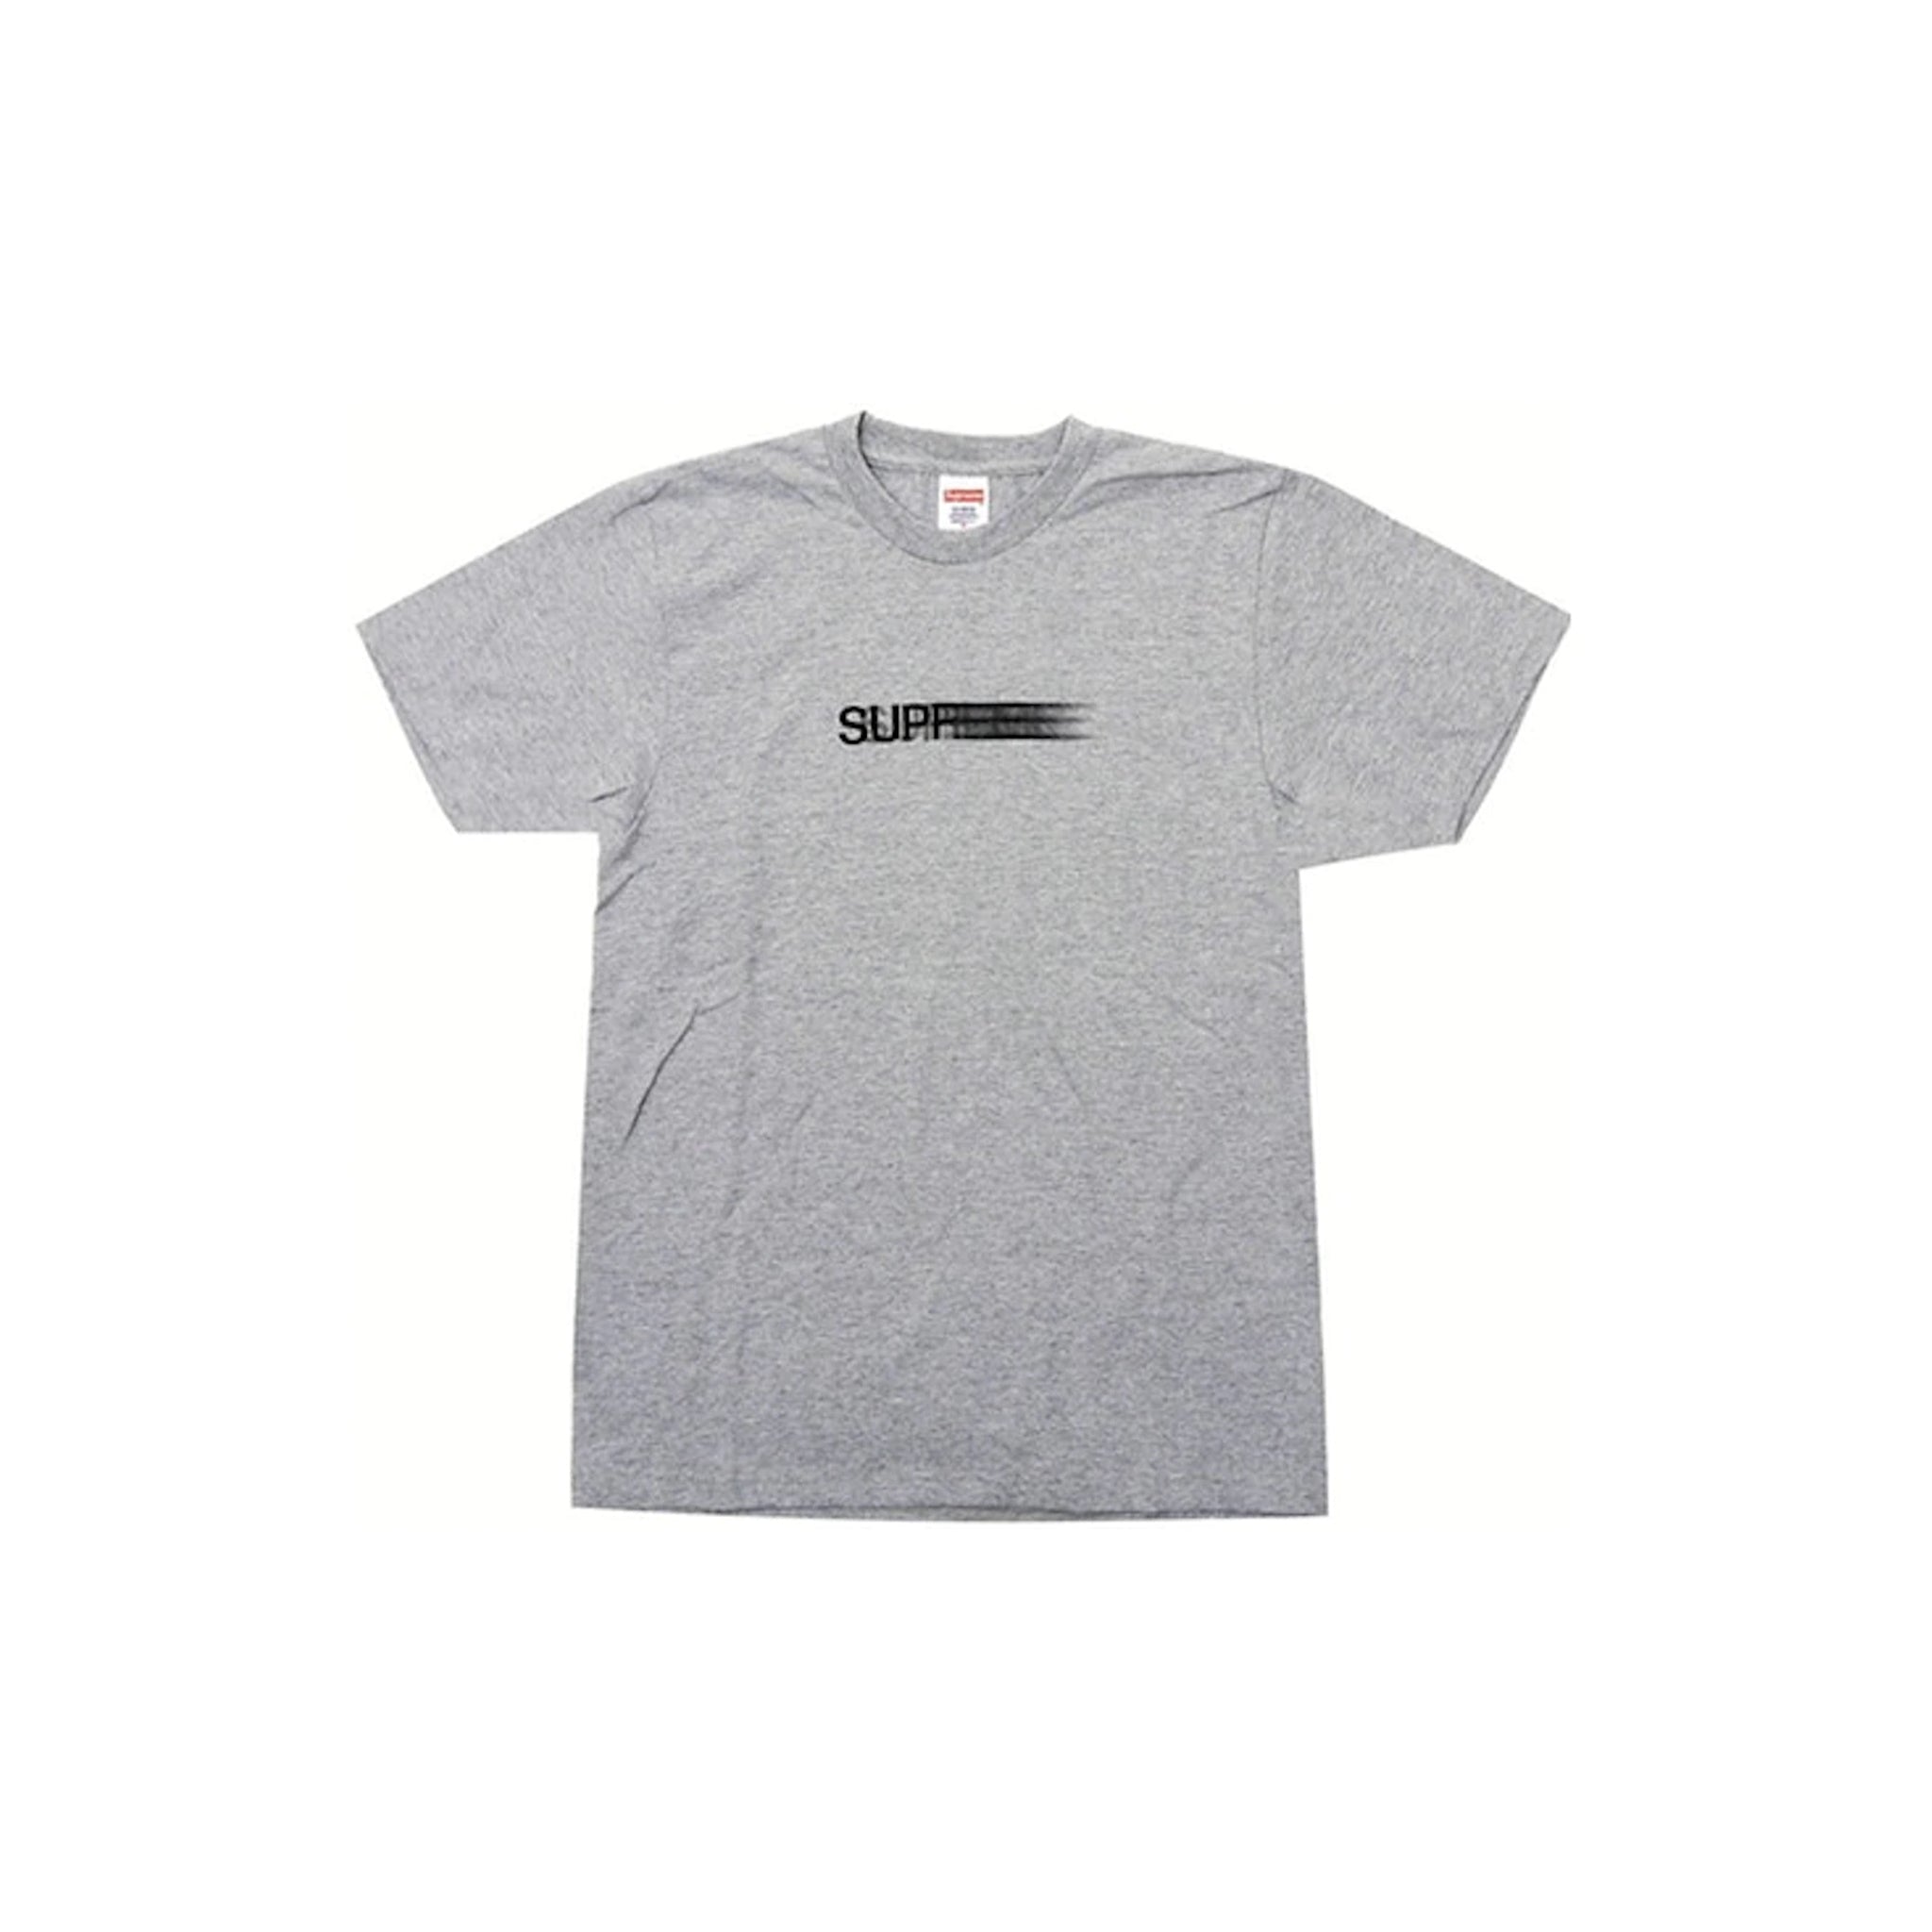 FIRE $1 SNEAKER AUCTIONS & GIVEAWAYS - Supreme Location Tee Light ...